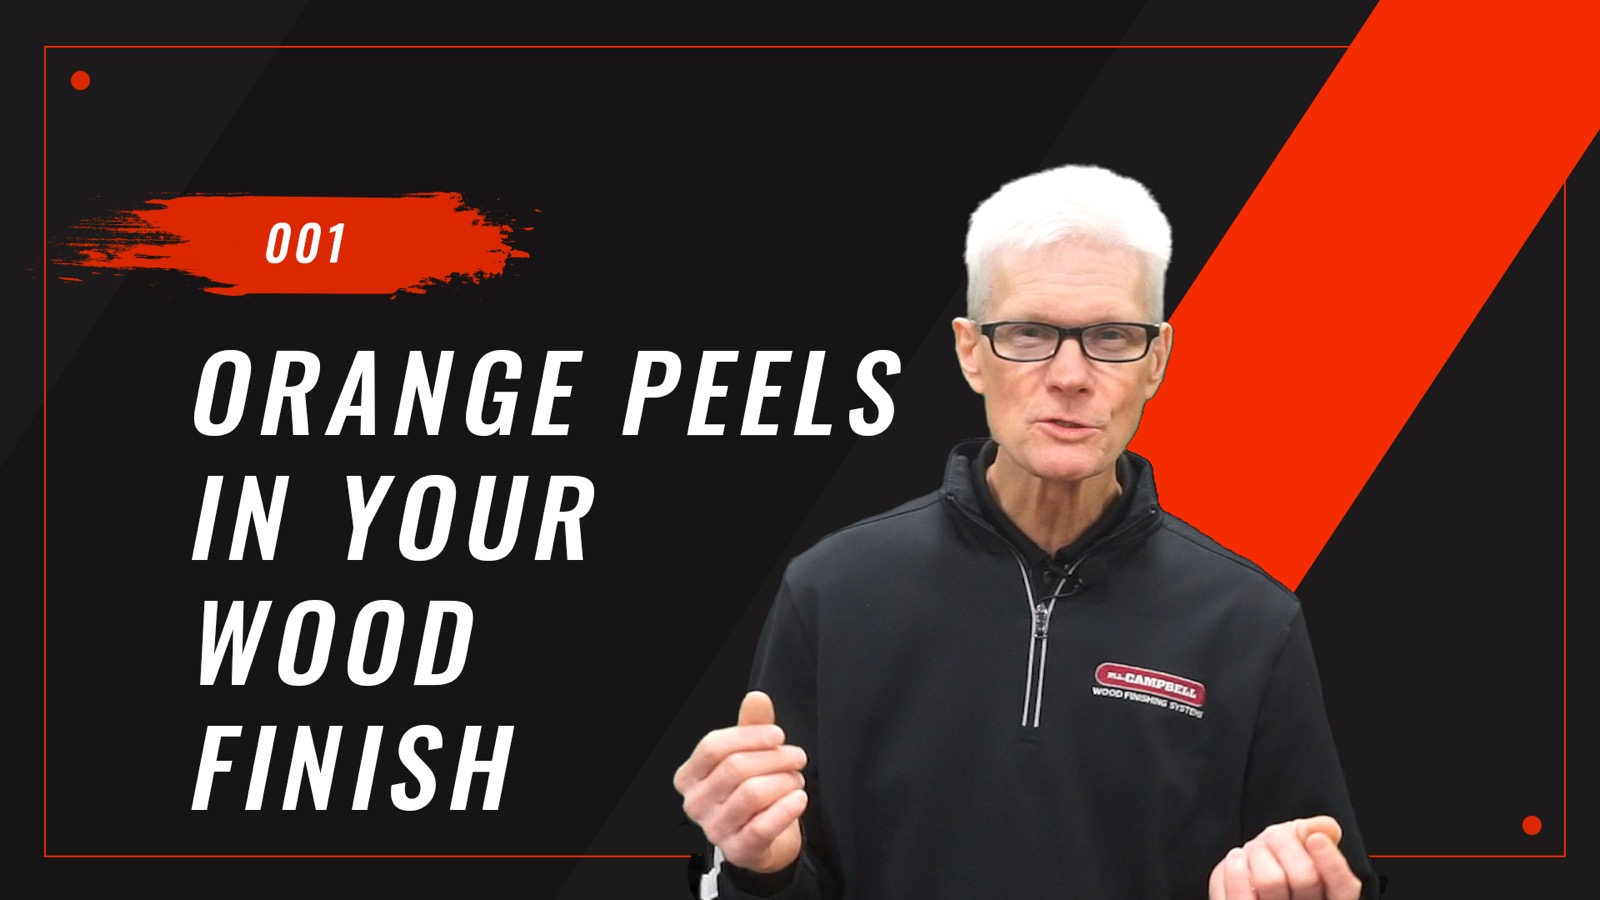 Do you Have Orange Peels in your Finish?